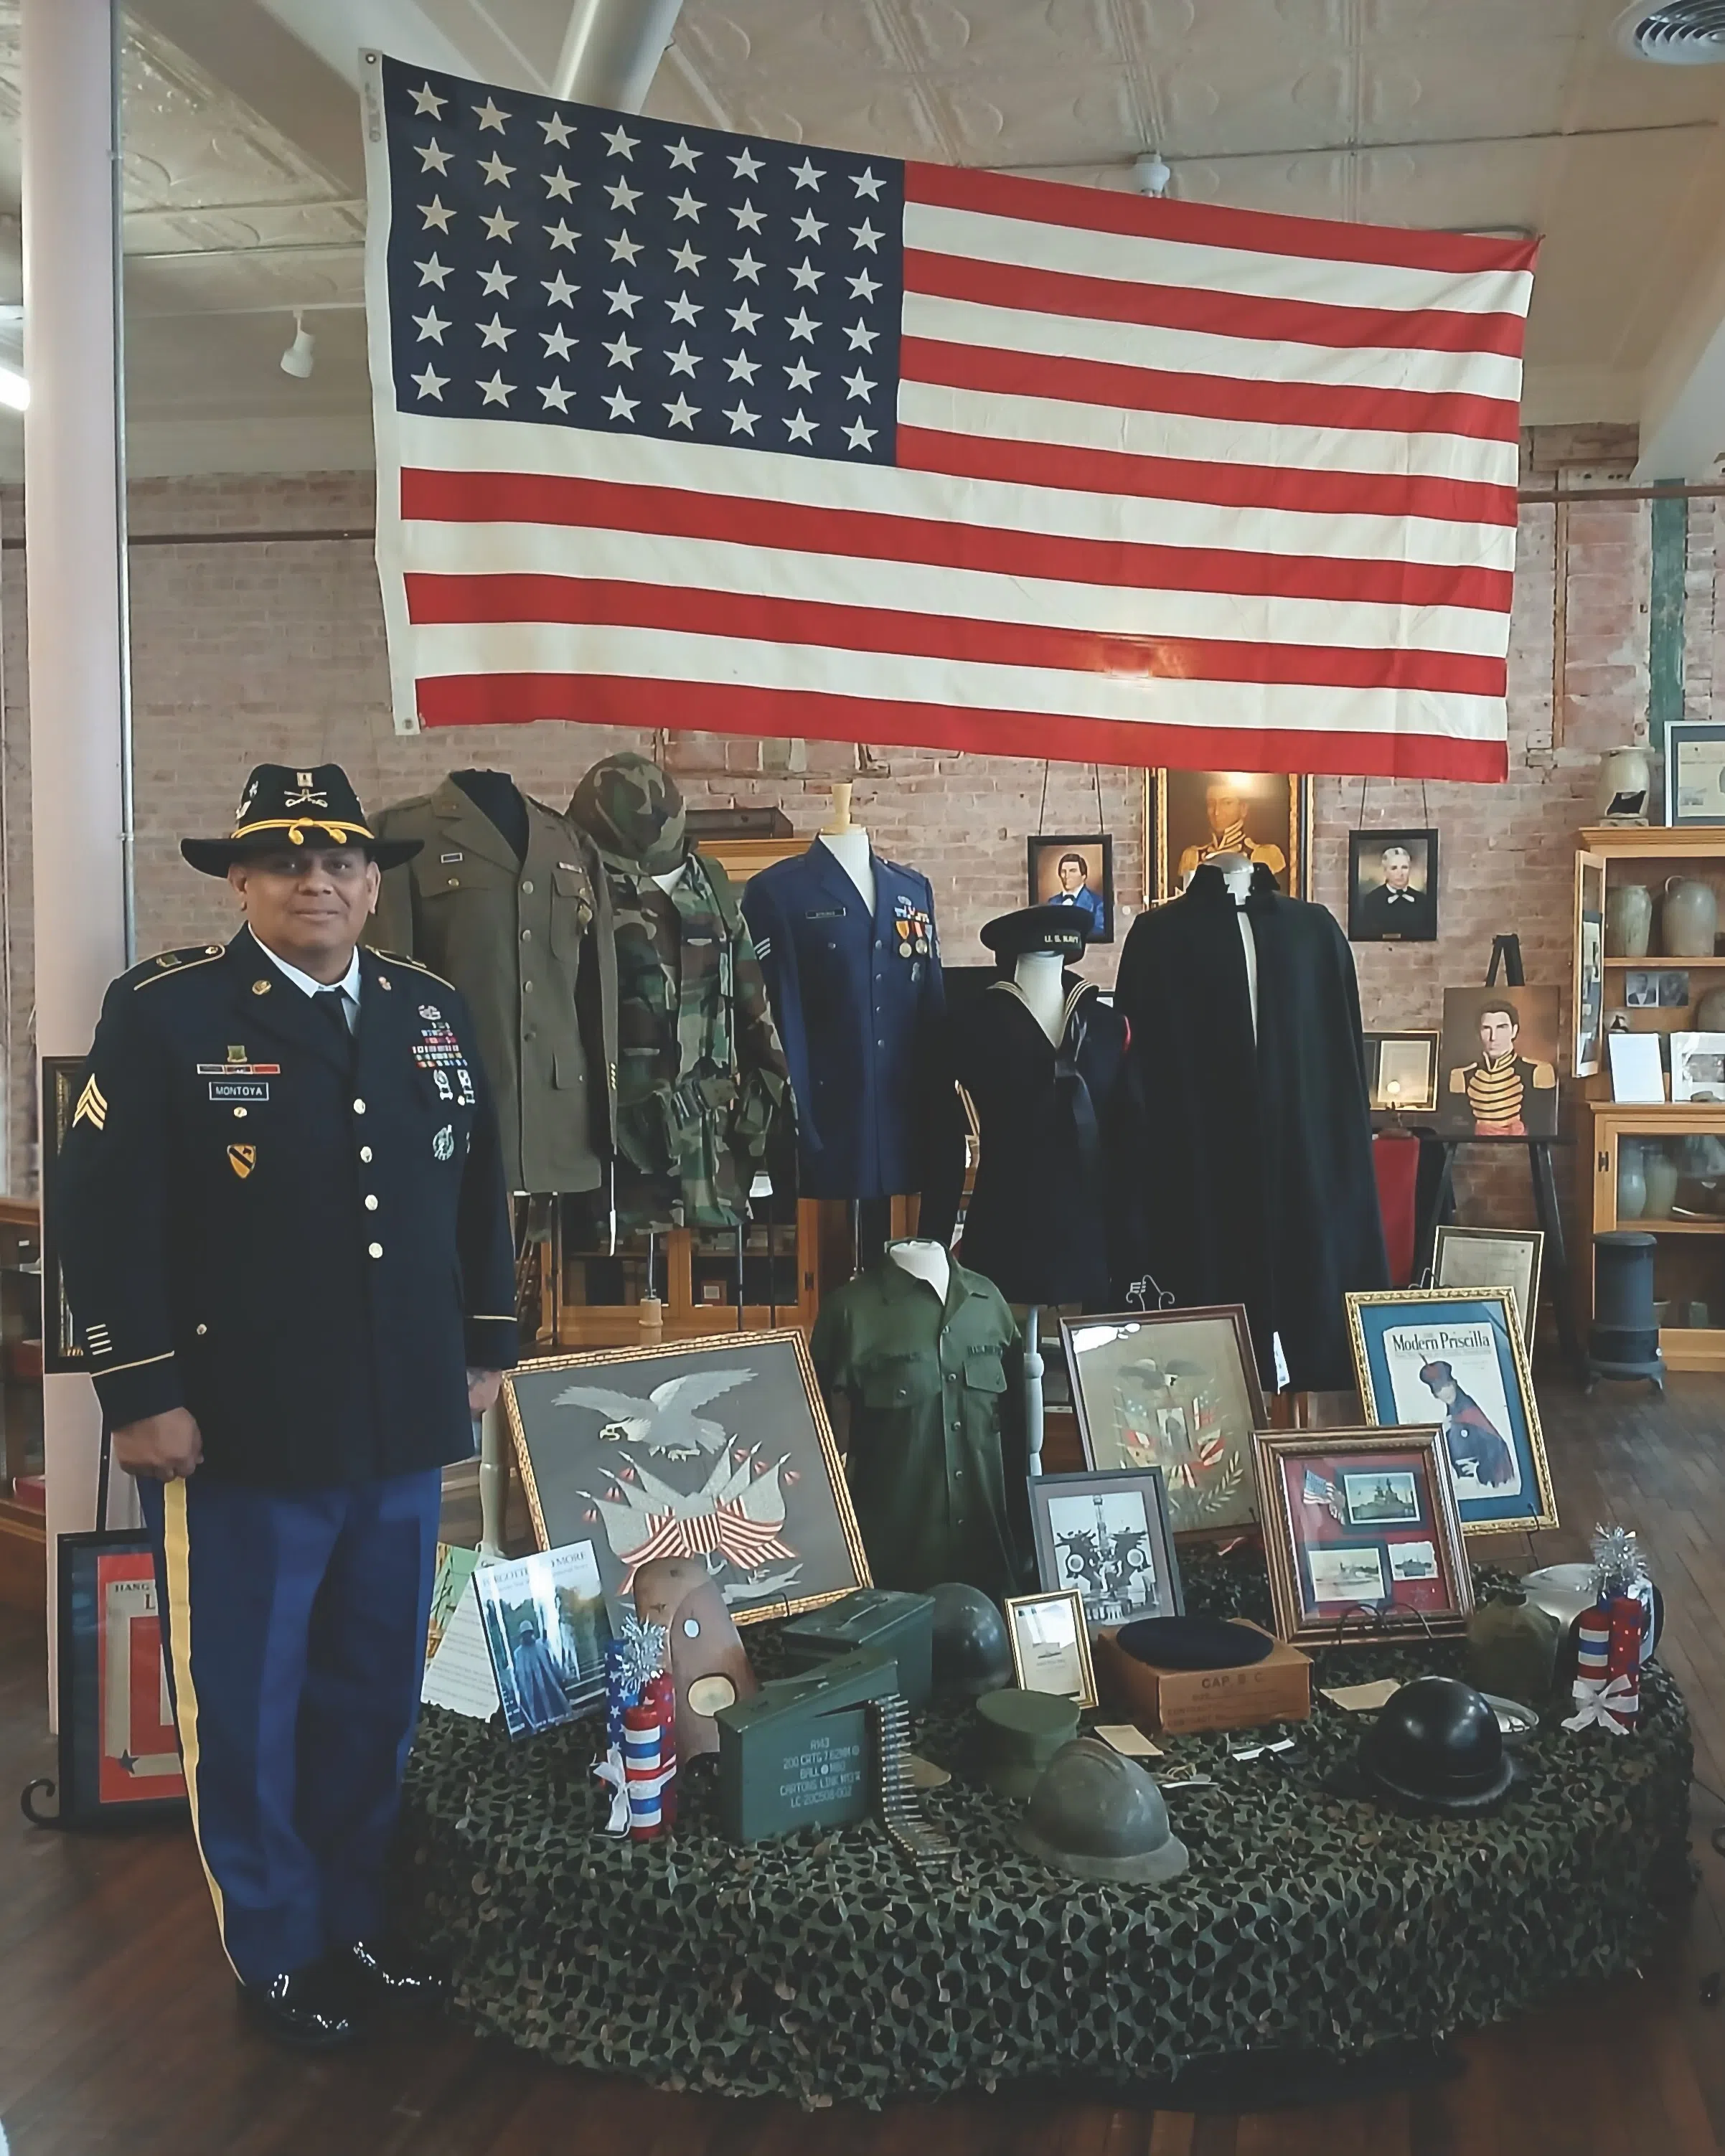 Local museum salutes military community this month